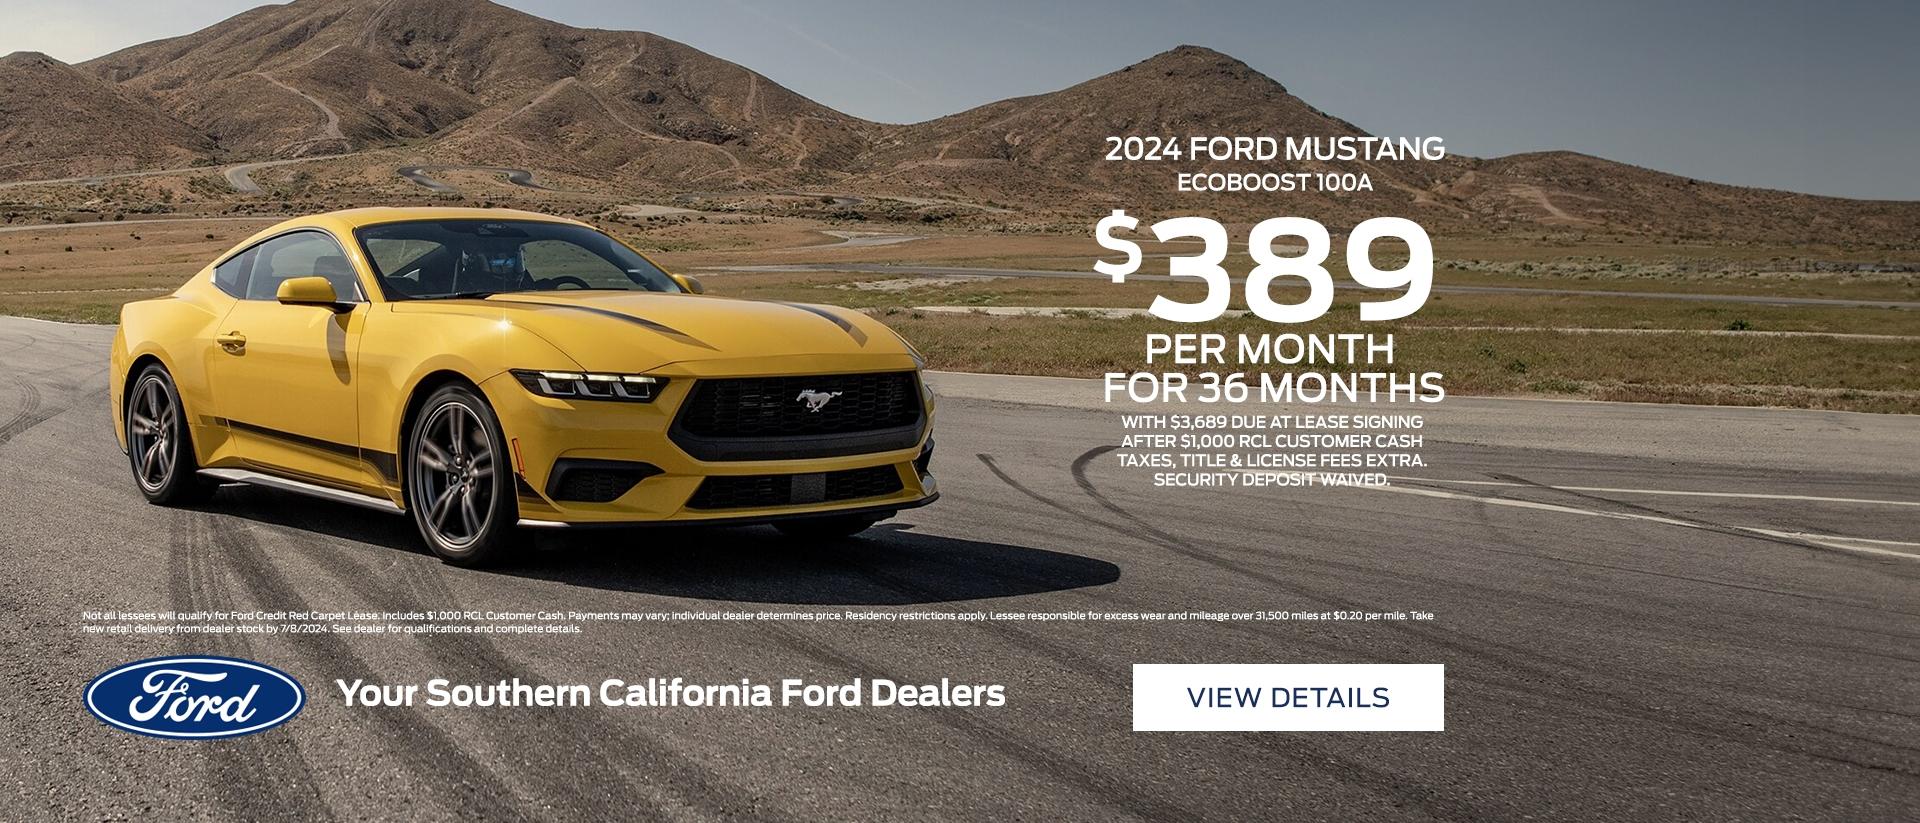 2024 Ford Mustang Lease Offer | Southern California Ford Dealers